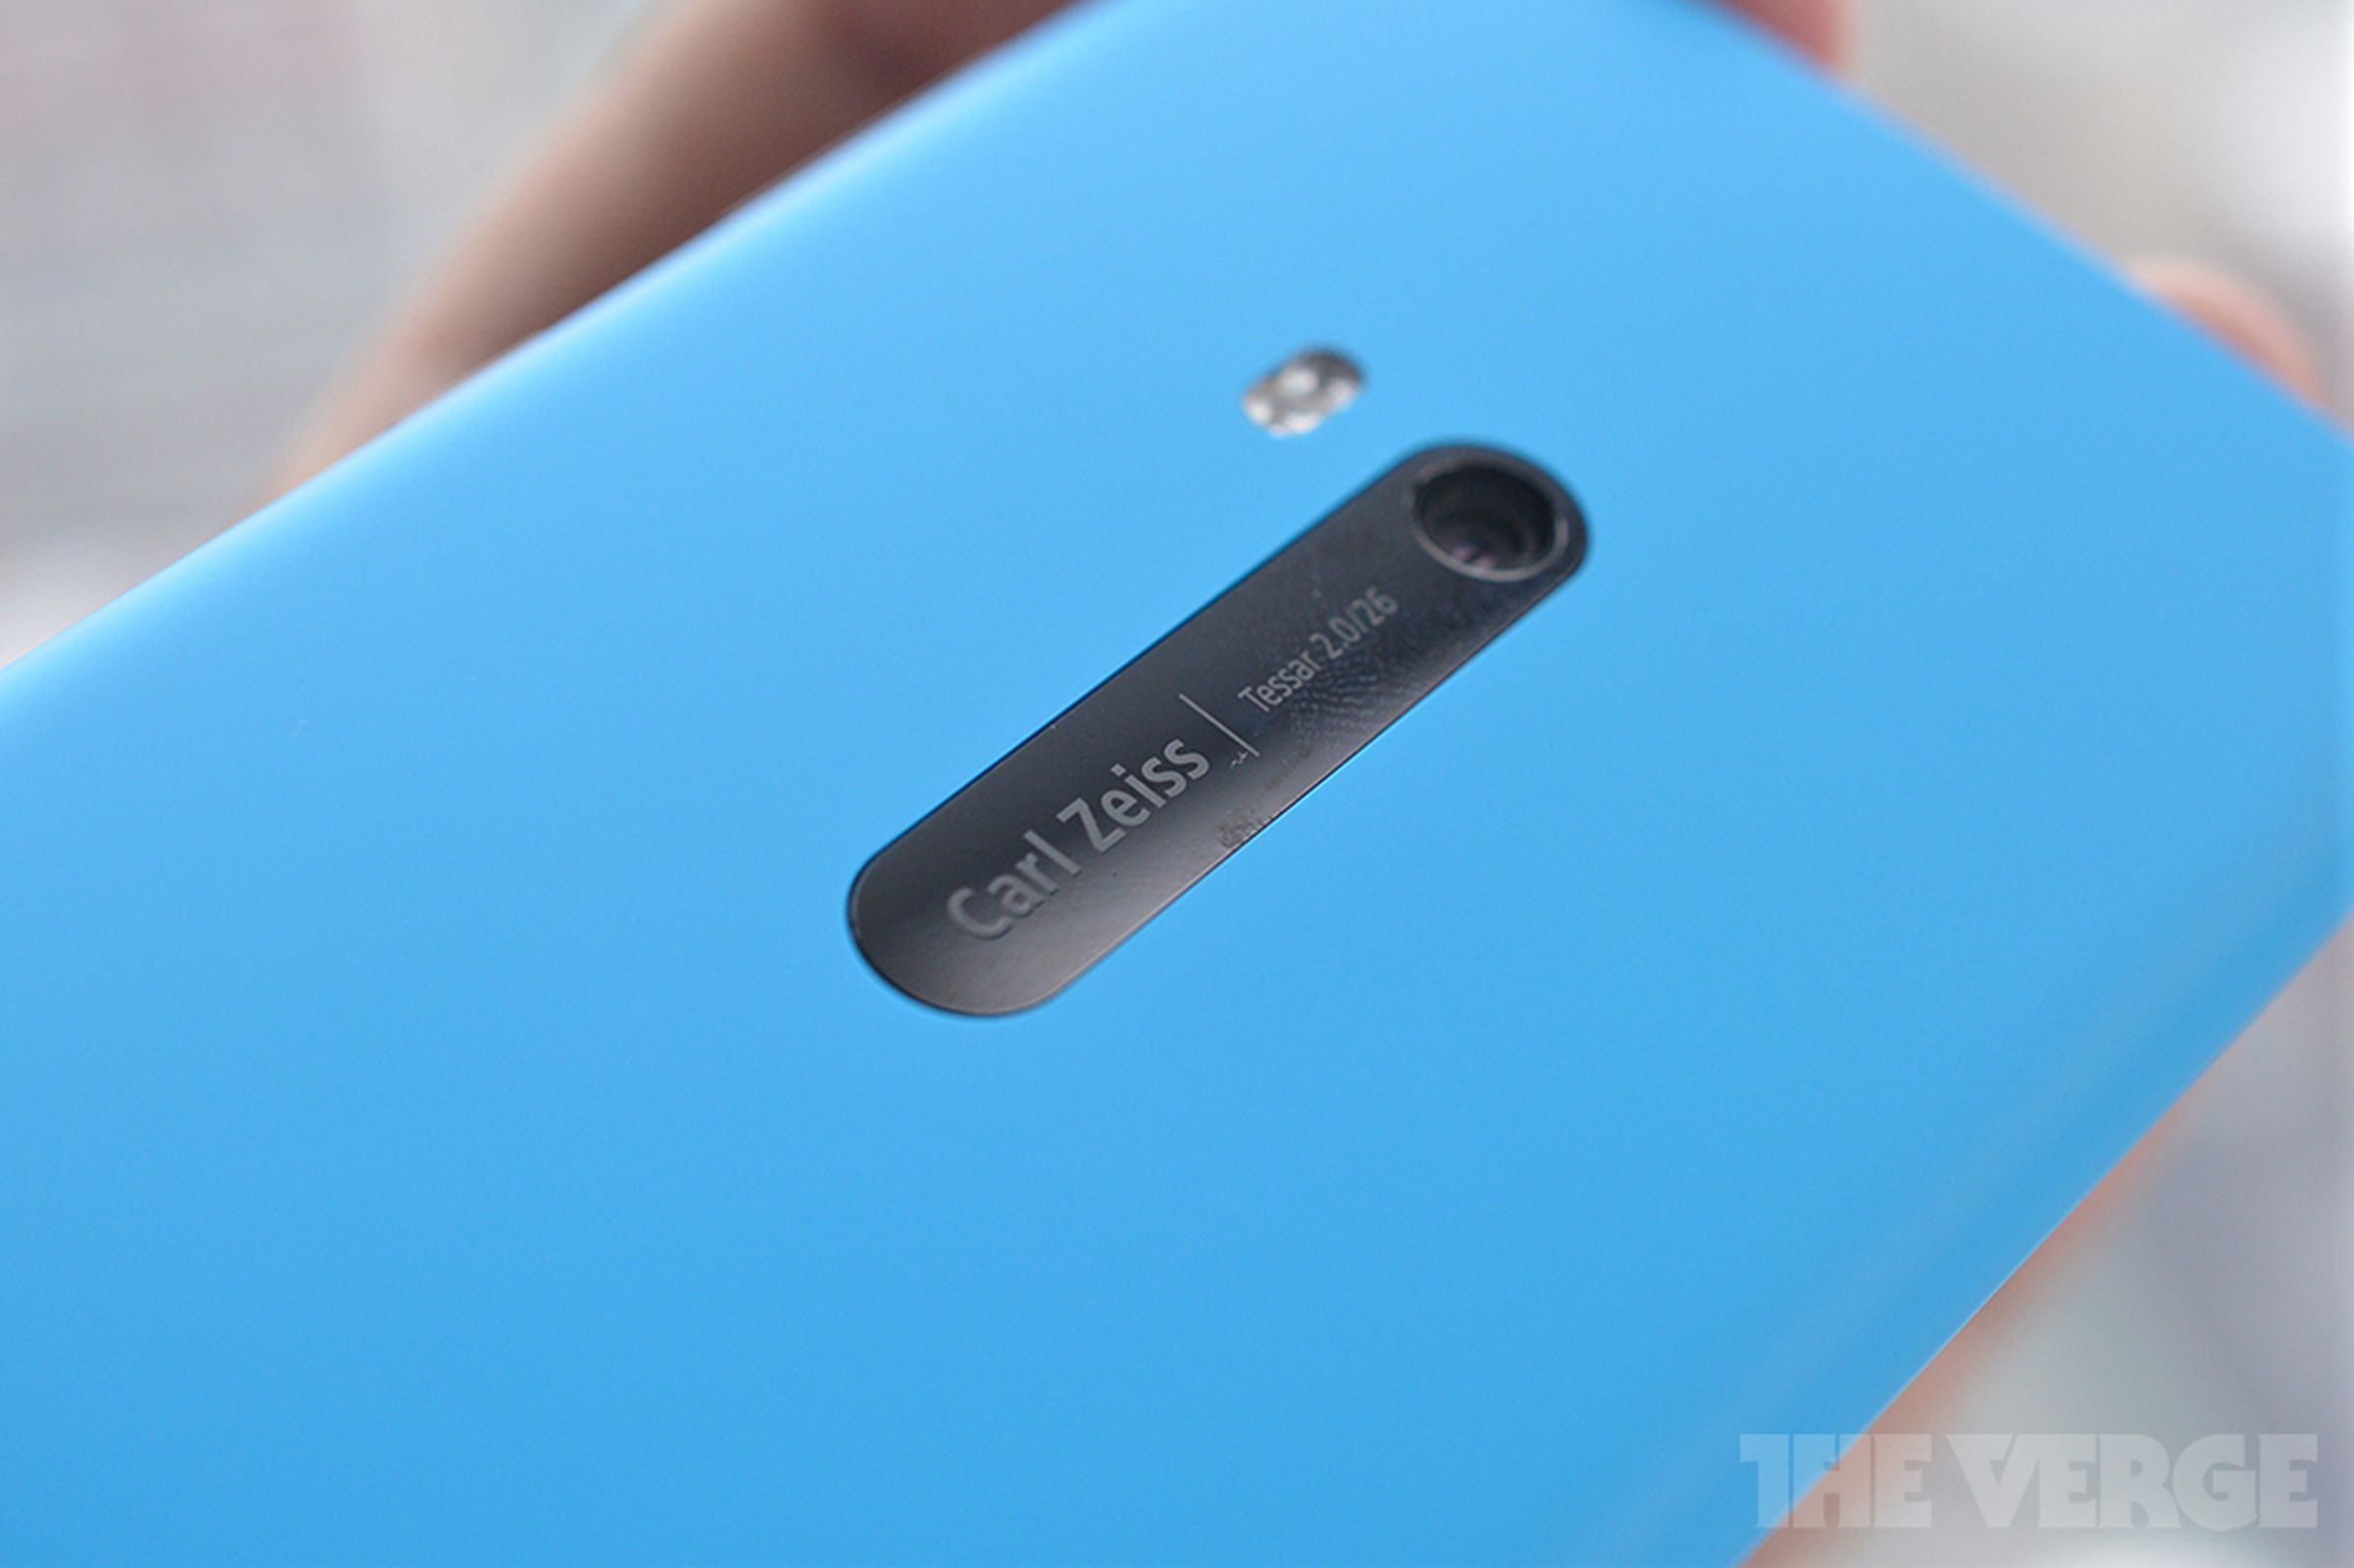 Lumia 920 for AT&T in cyan (hands-on pictures)